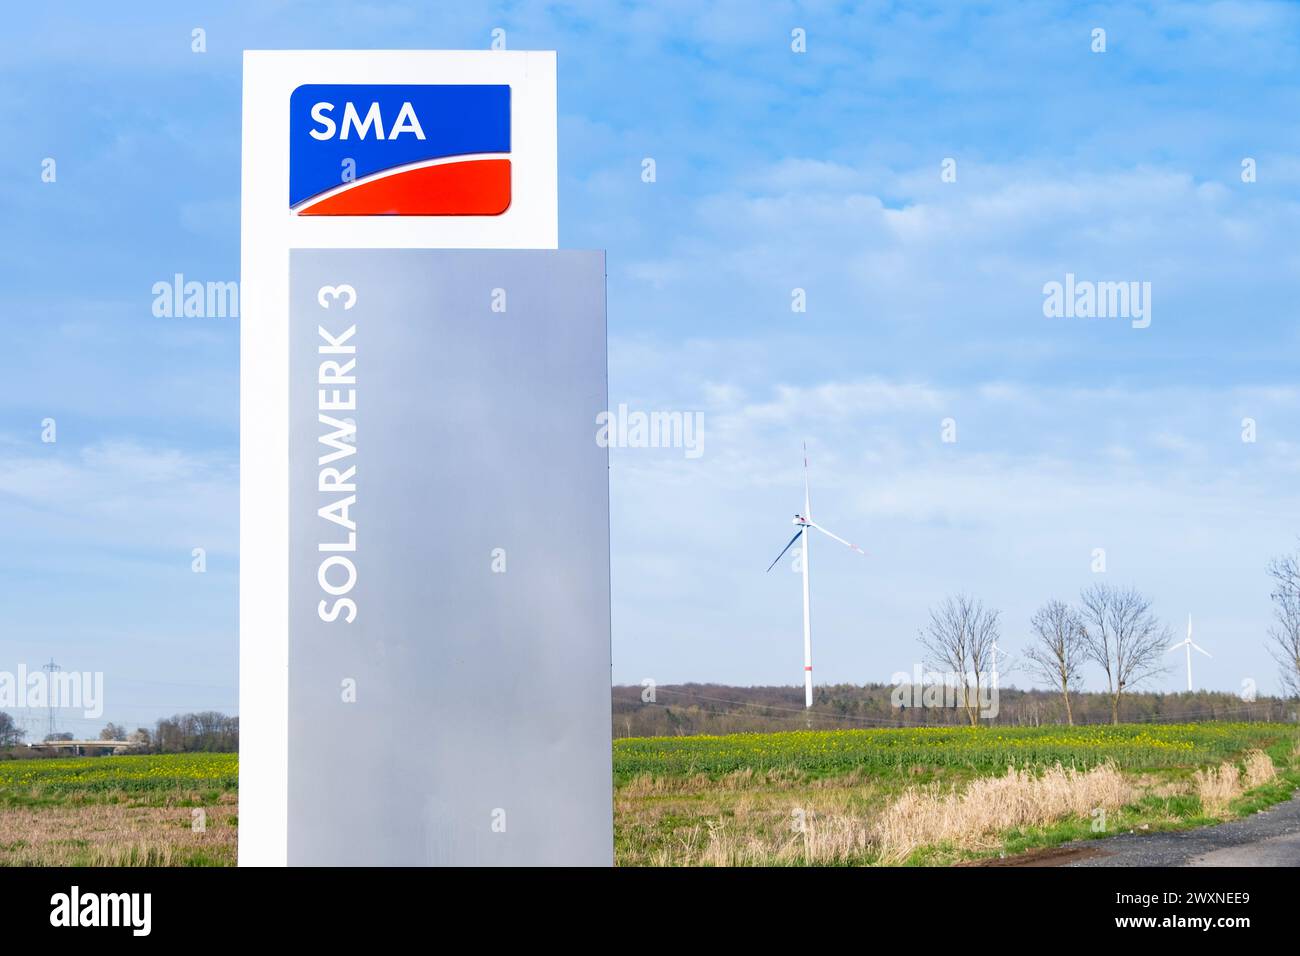 SMA company's logo, SMA Solar Technology AG, global manufacturer inverters, photovoltaic solar systems, Renewable Energy, Green Technology, Sustainabl Stock Photo